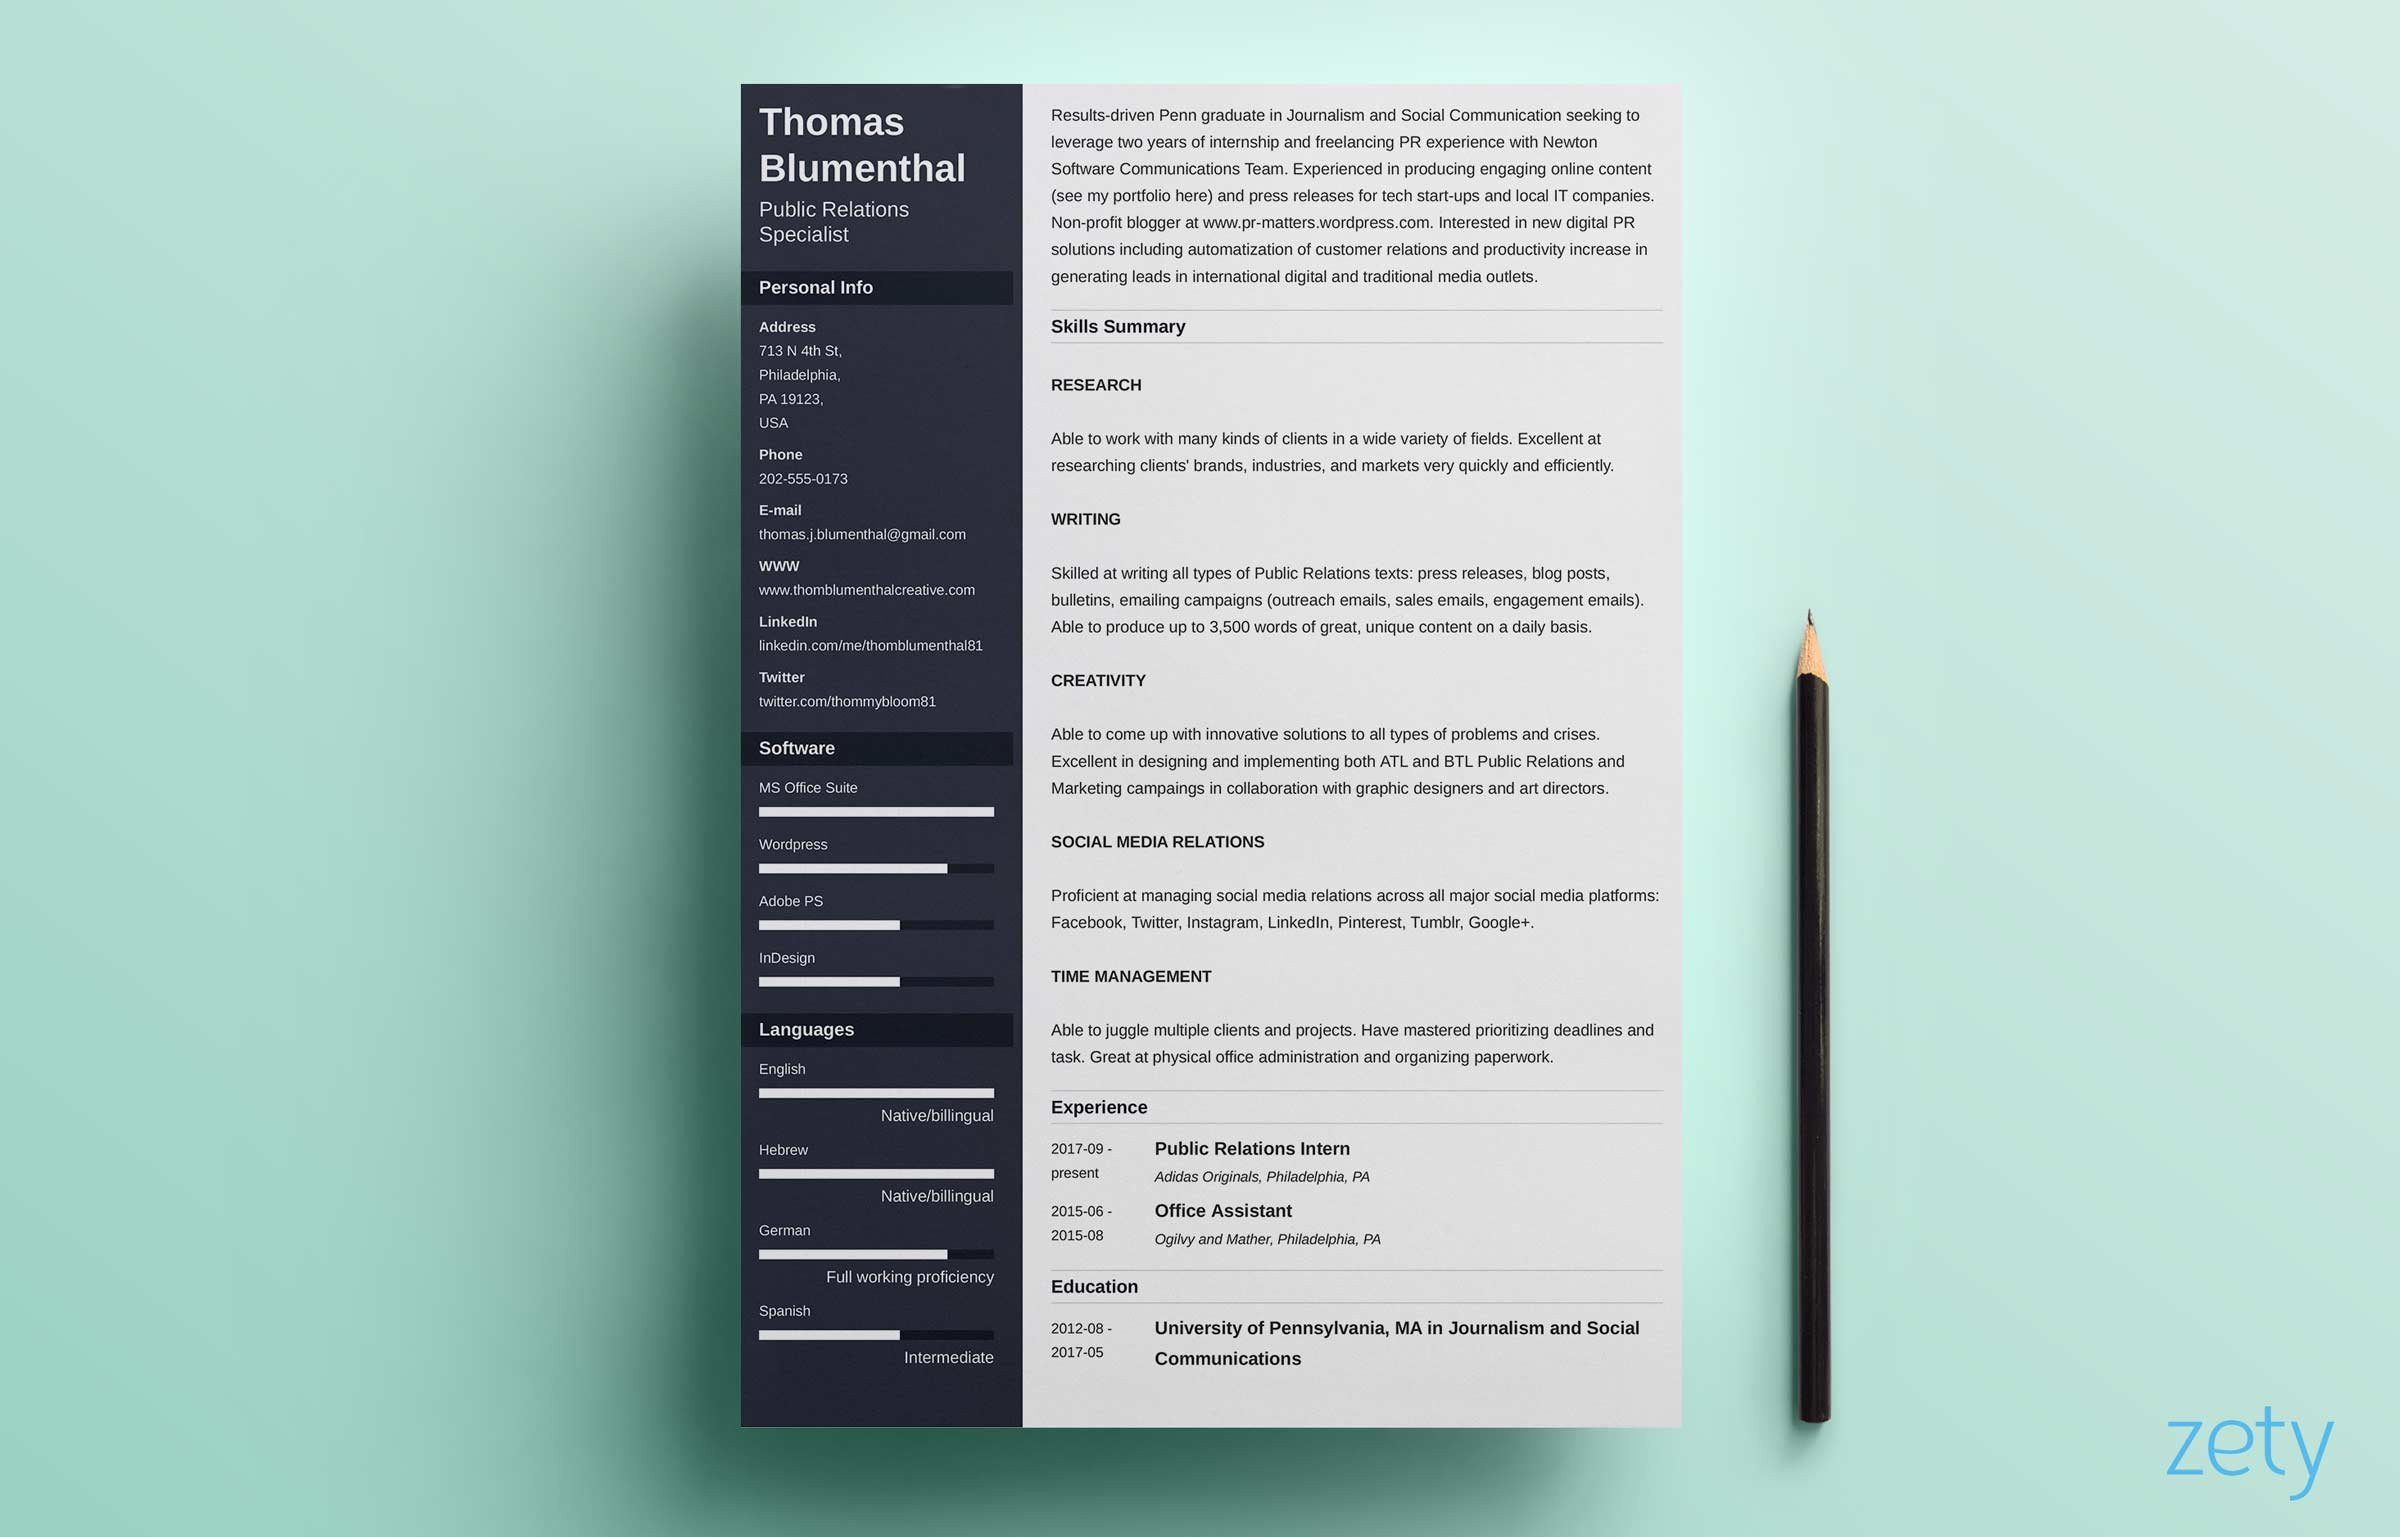 Sample Resume with Action Skill Set Functional Resume: Examples & Skills Based Templates